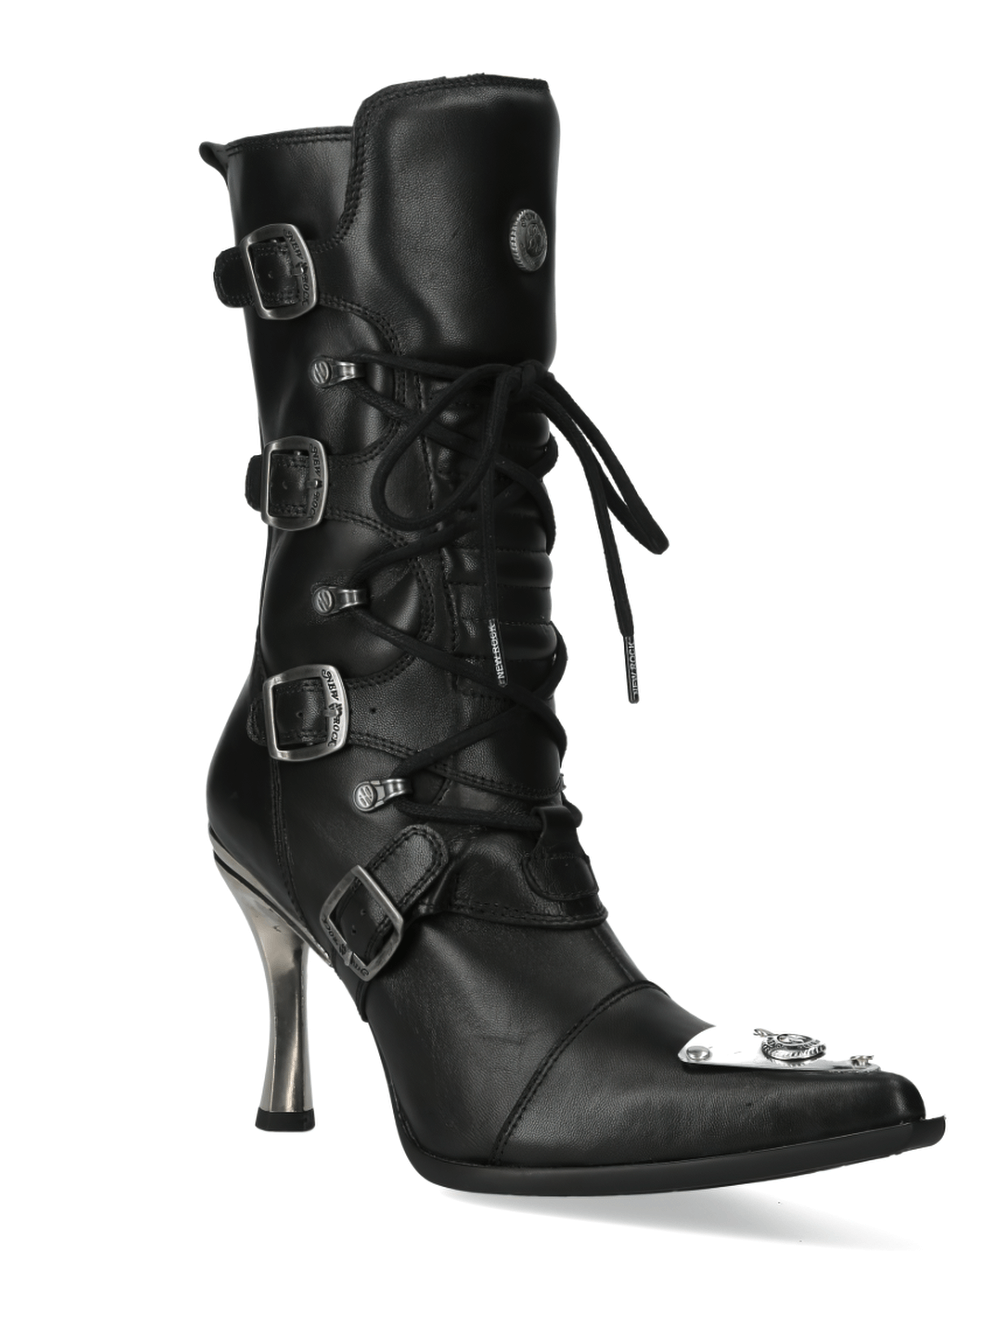 NEW ROCK Black Lace-Up High Heel Boots with Buckle Details